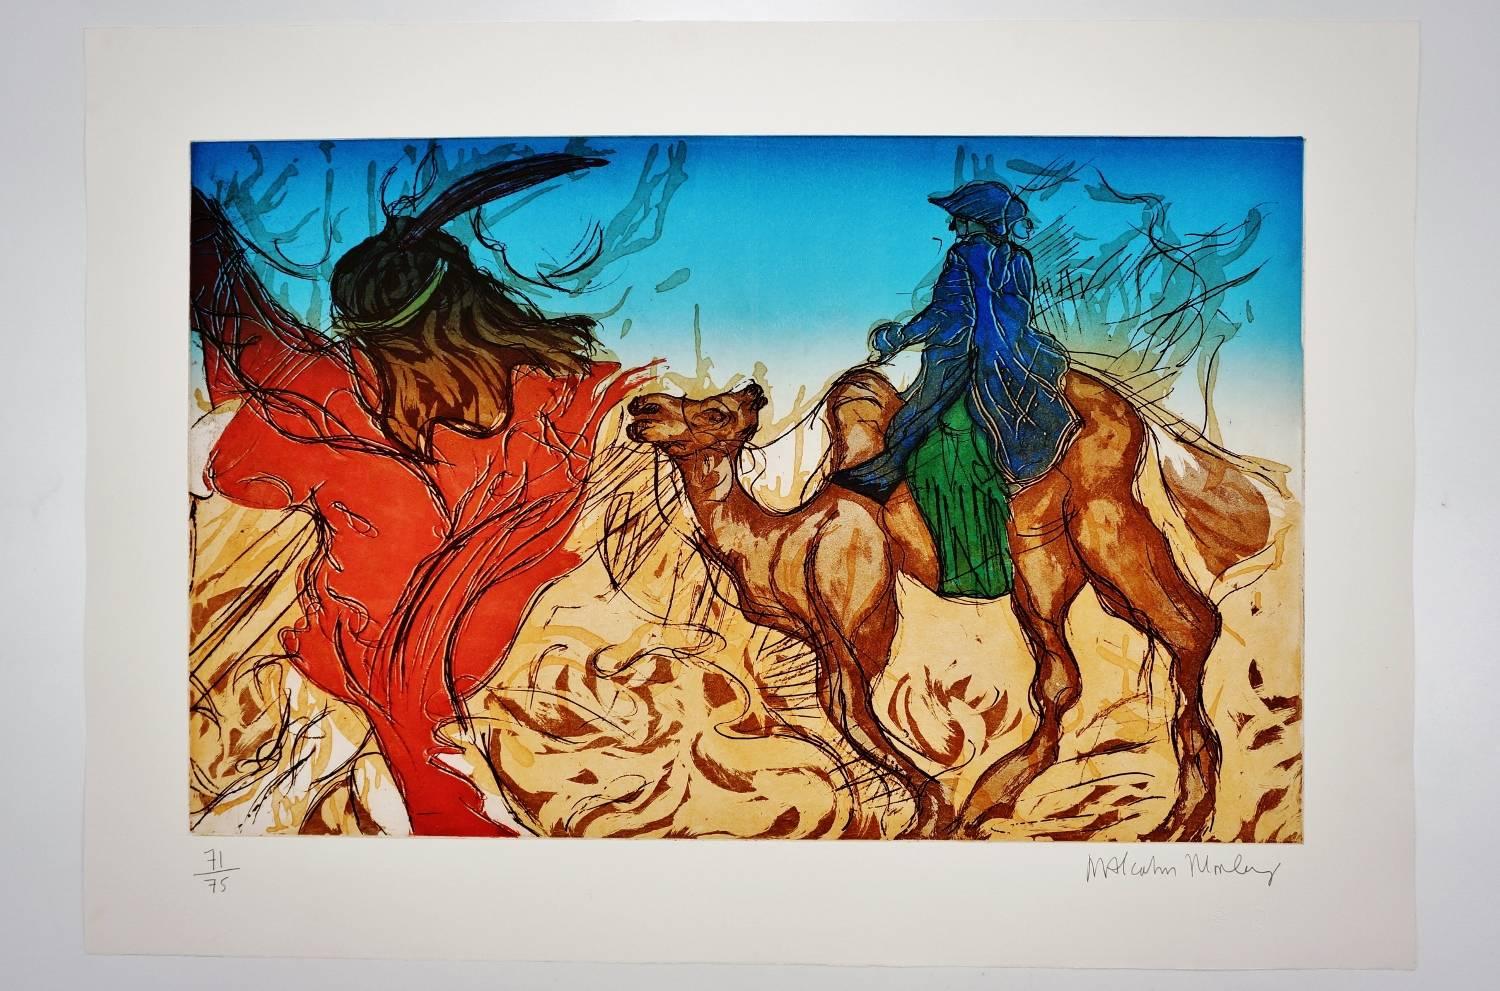 Malcolm Morley print `Loneliness of a Warrior` original unframed limited edition print from the `Fallacies of Enoch`, 1984, USA.

Etching of aquatint in 4 to 9 colors and hand-printed on either 4 or 5 etching plates. Signed in pencil by the artist